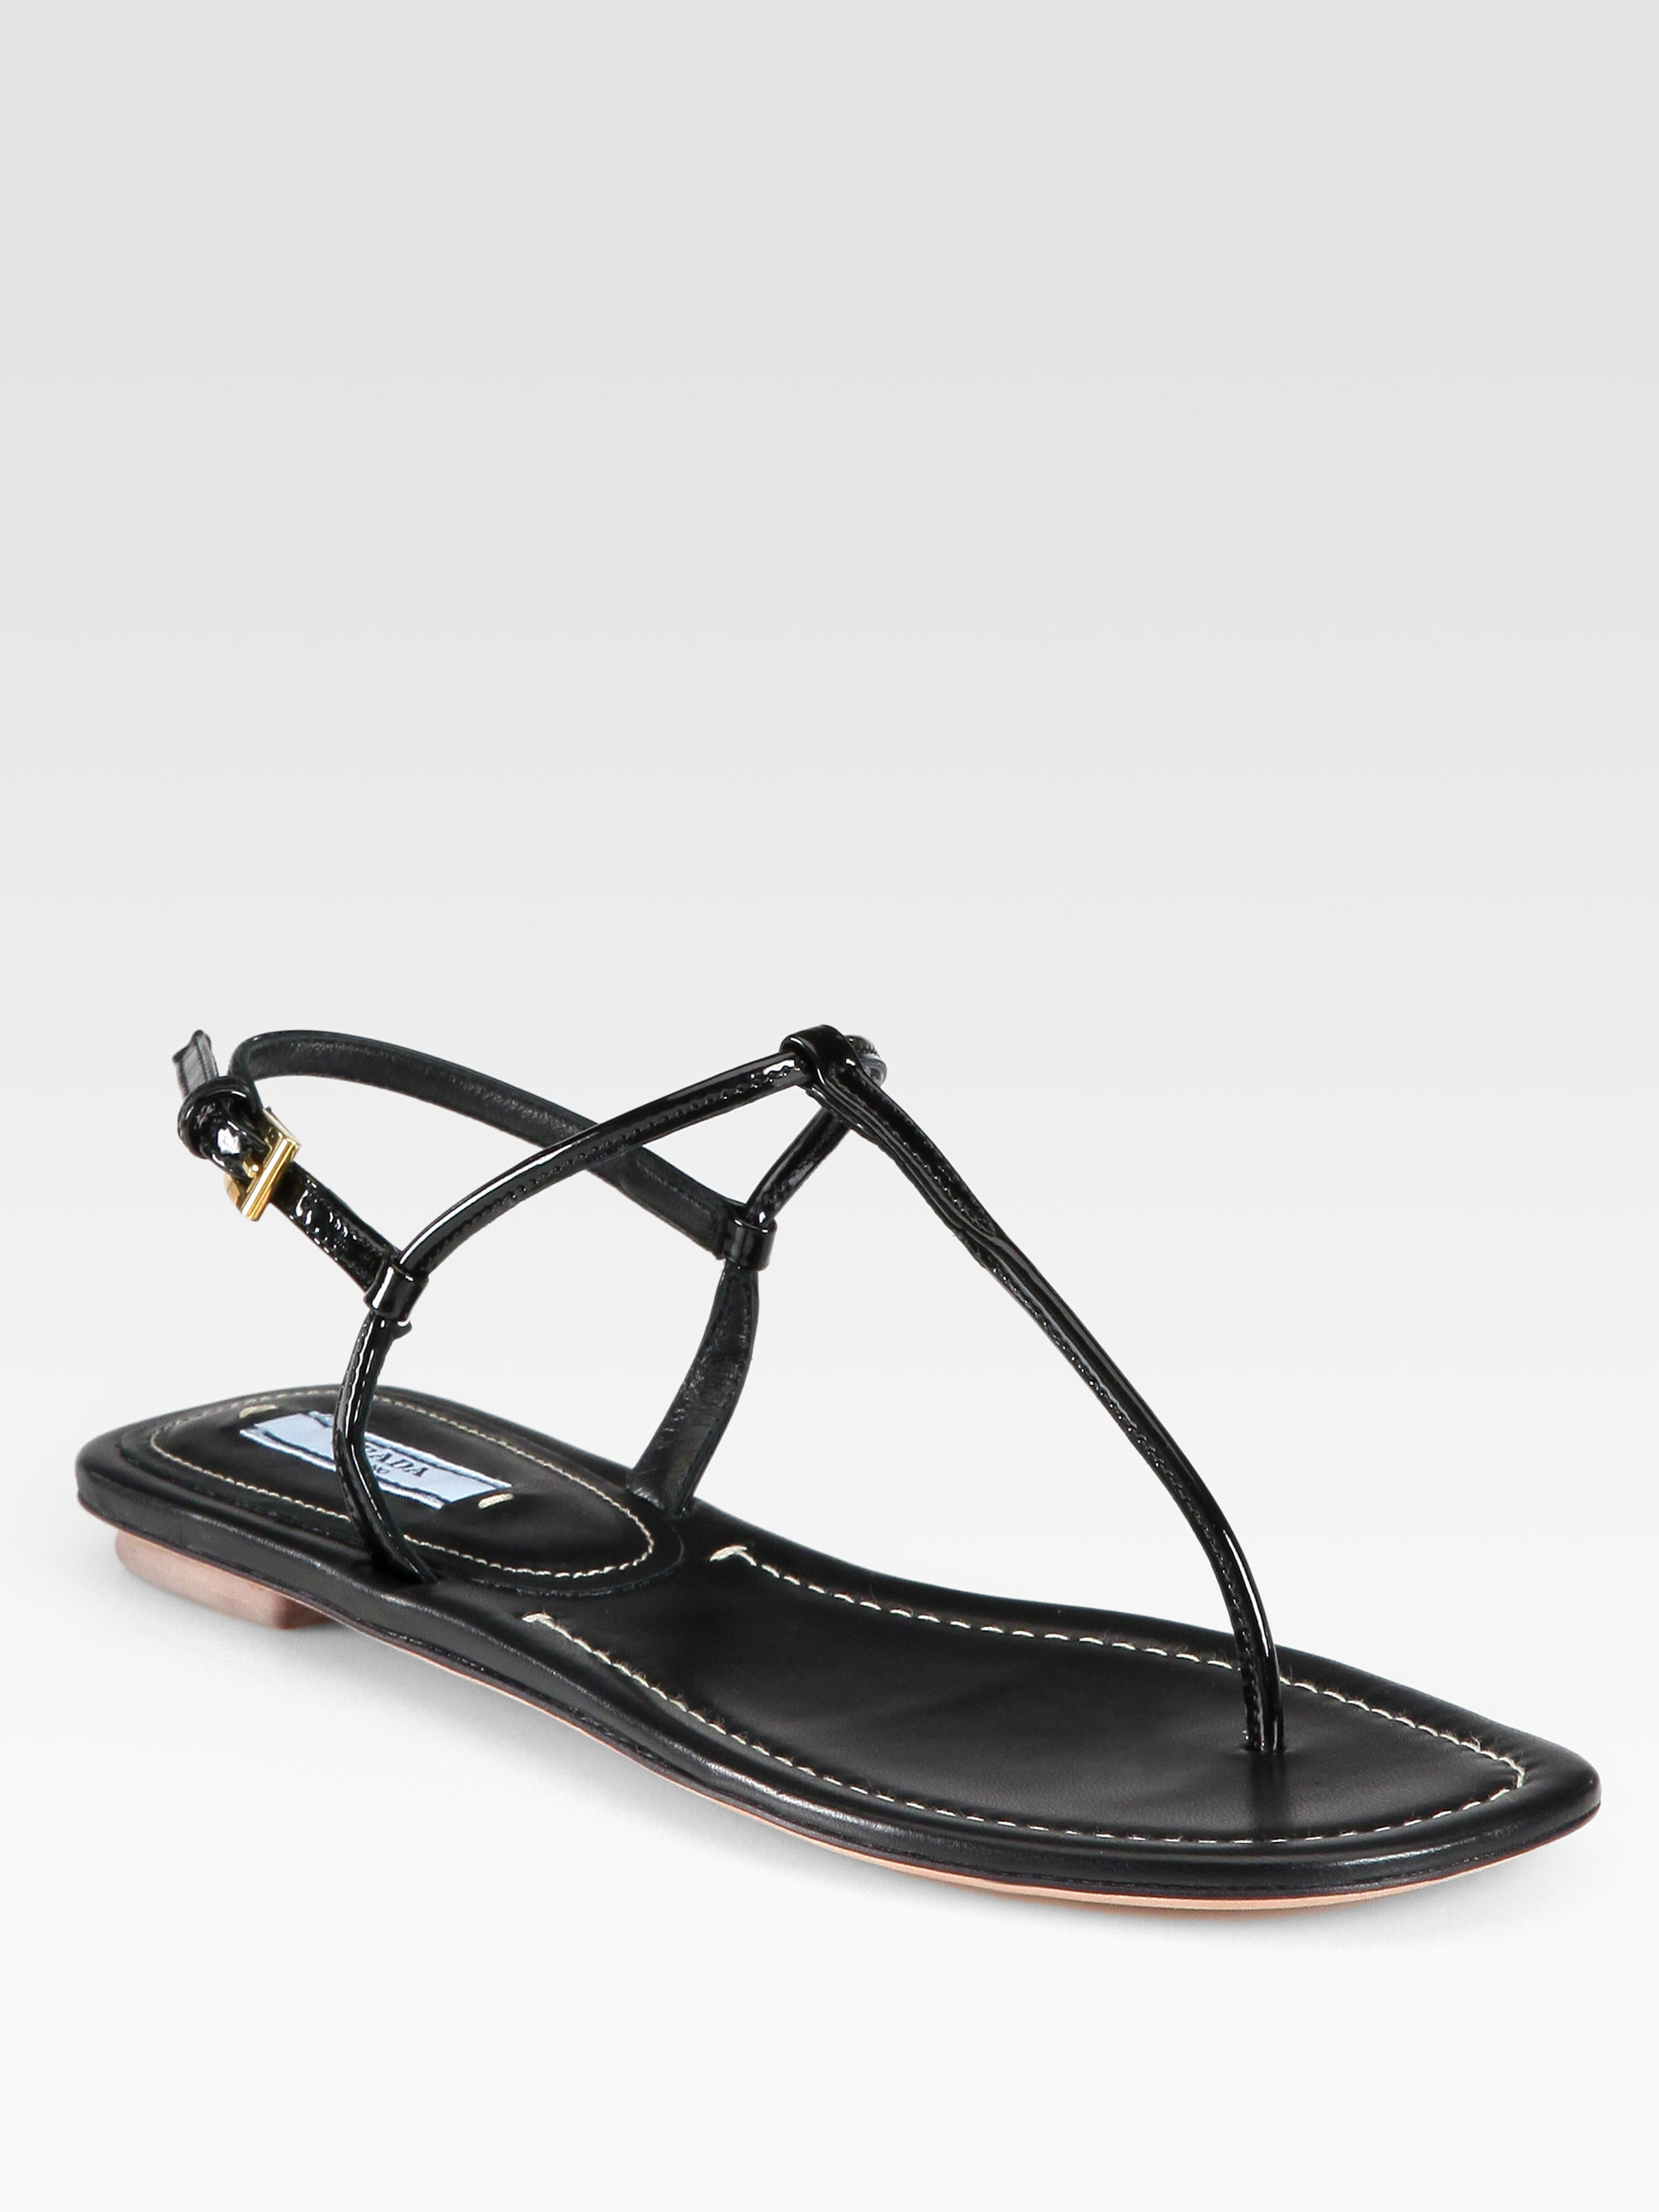 Lyst - Prada Patent Leather Thong Sandals in Black